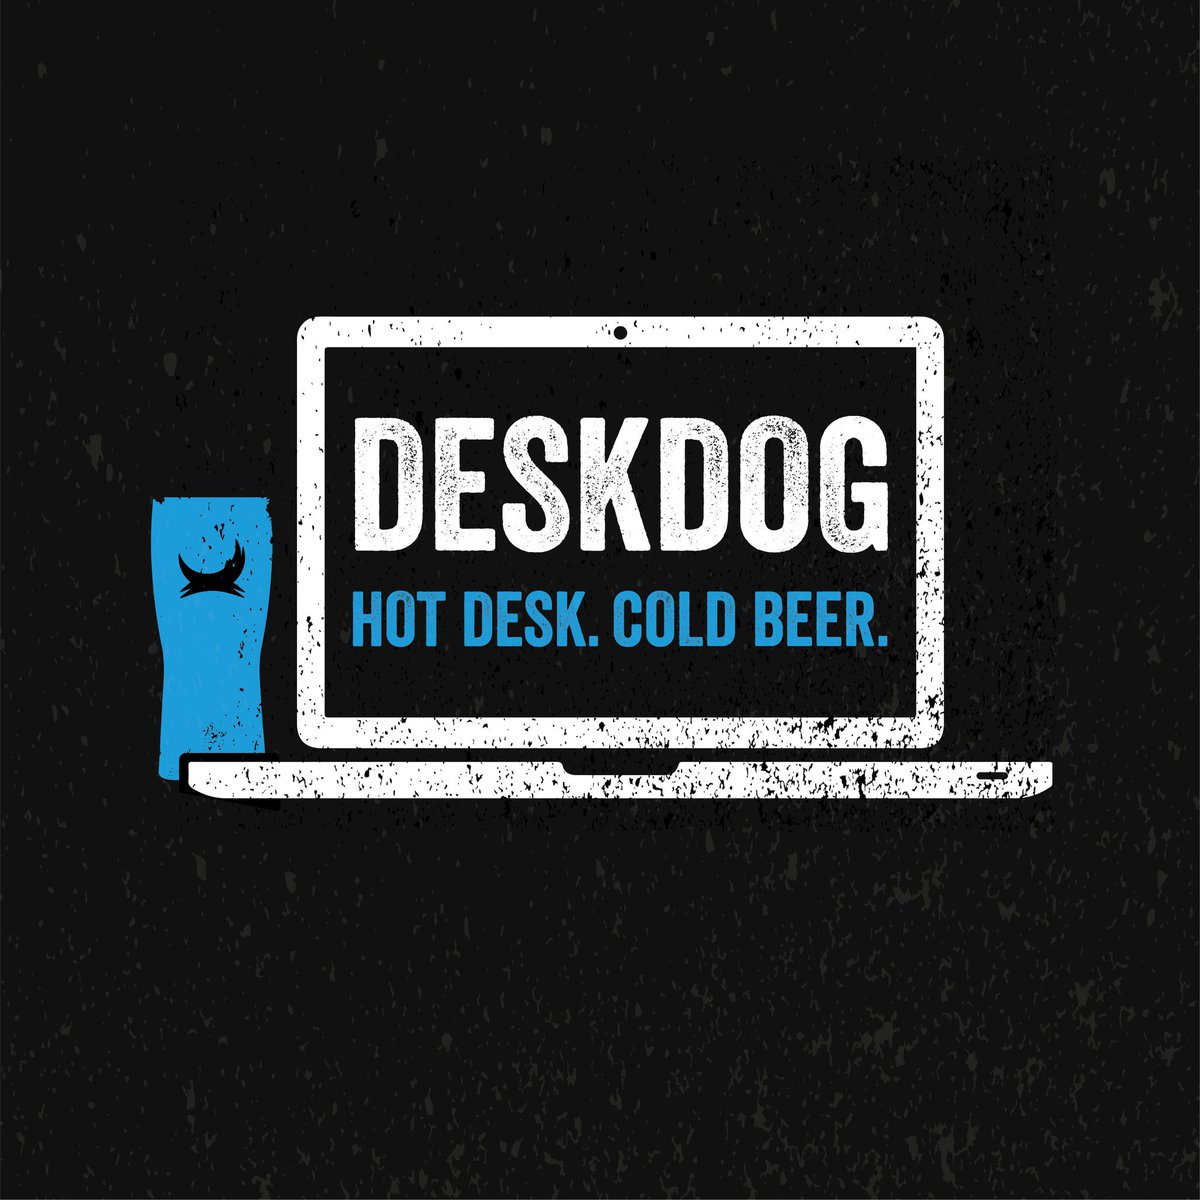 Introducing DeskDog...why not hot desk in a BrewDog bar? £7 unlimited coffee all day, free WiFi and a pint of Punk IPA at the end of the day!

Book in advance online!